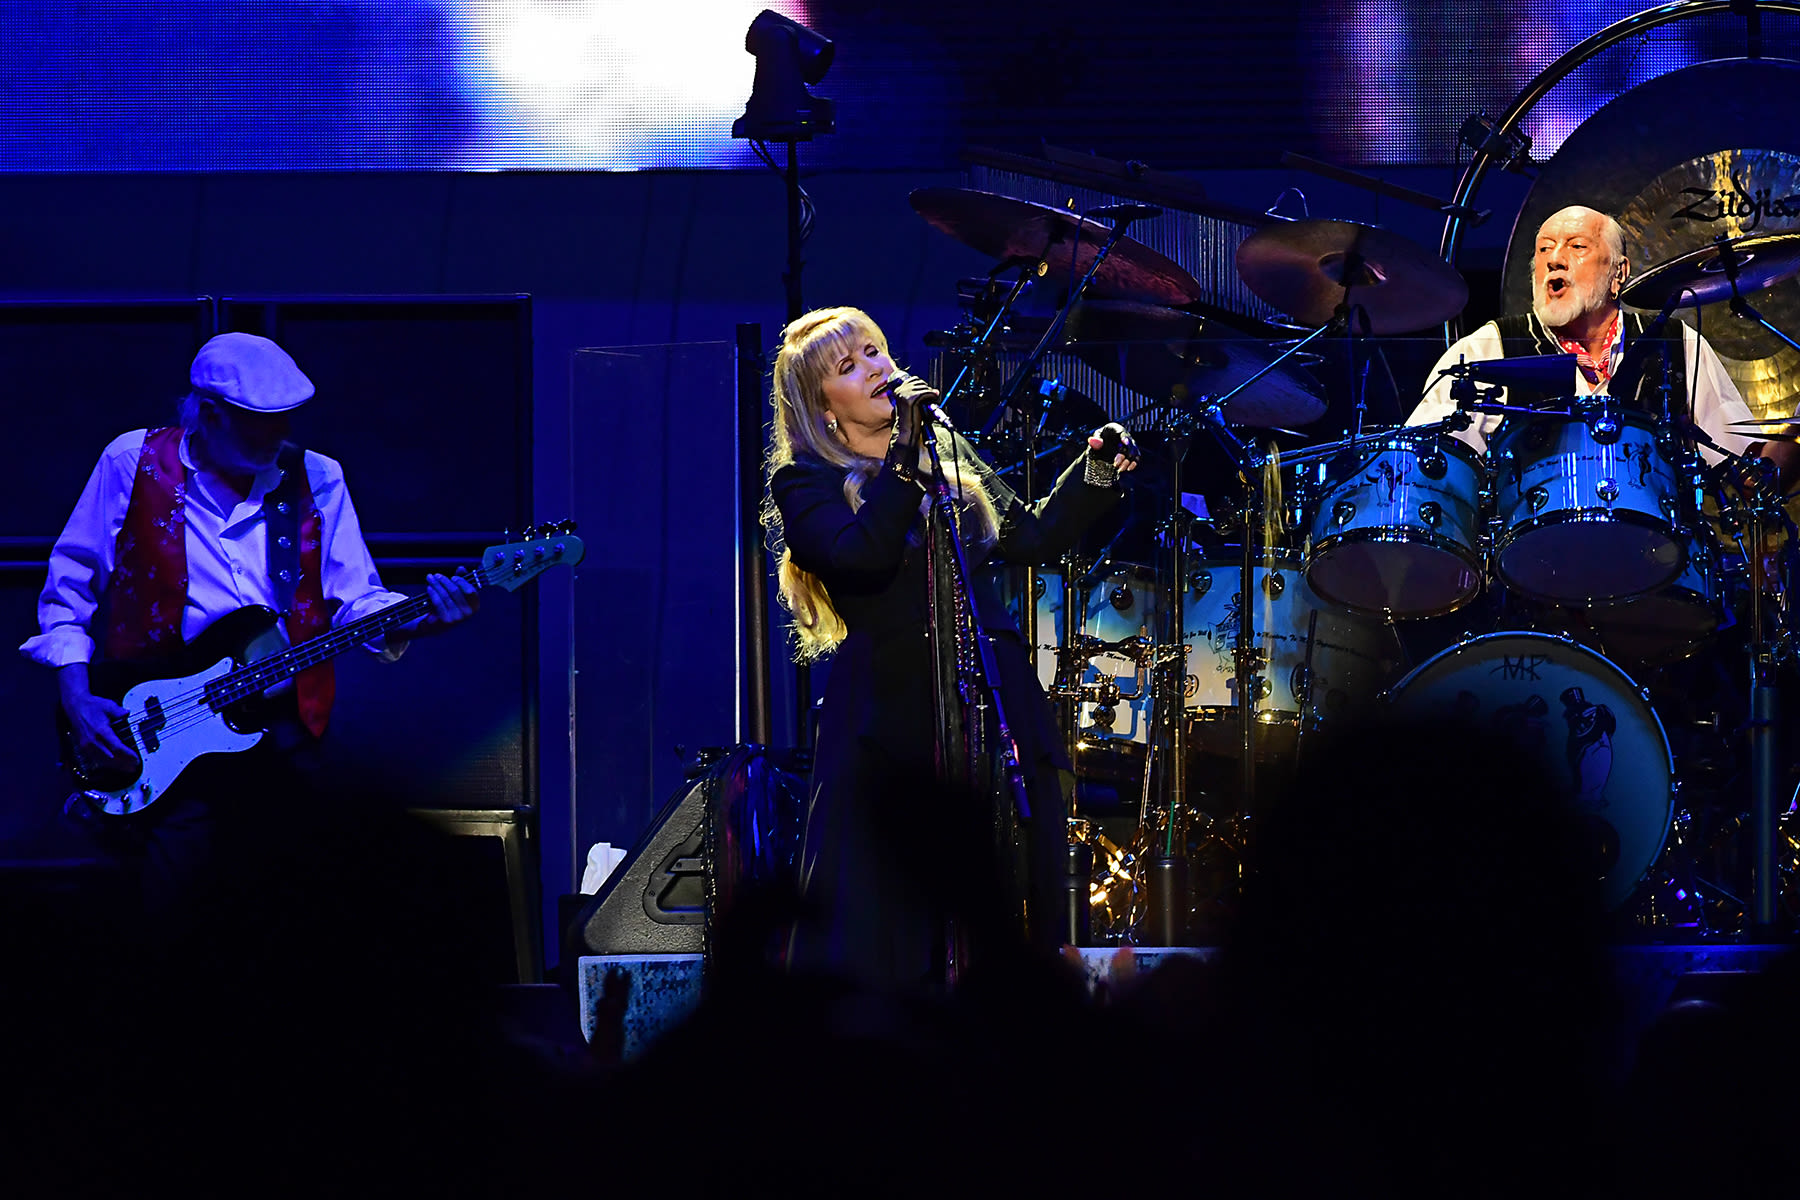 Watch Fleetwood Mac Perform ‘Don’t Stop’ at Final Concert in 2019